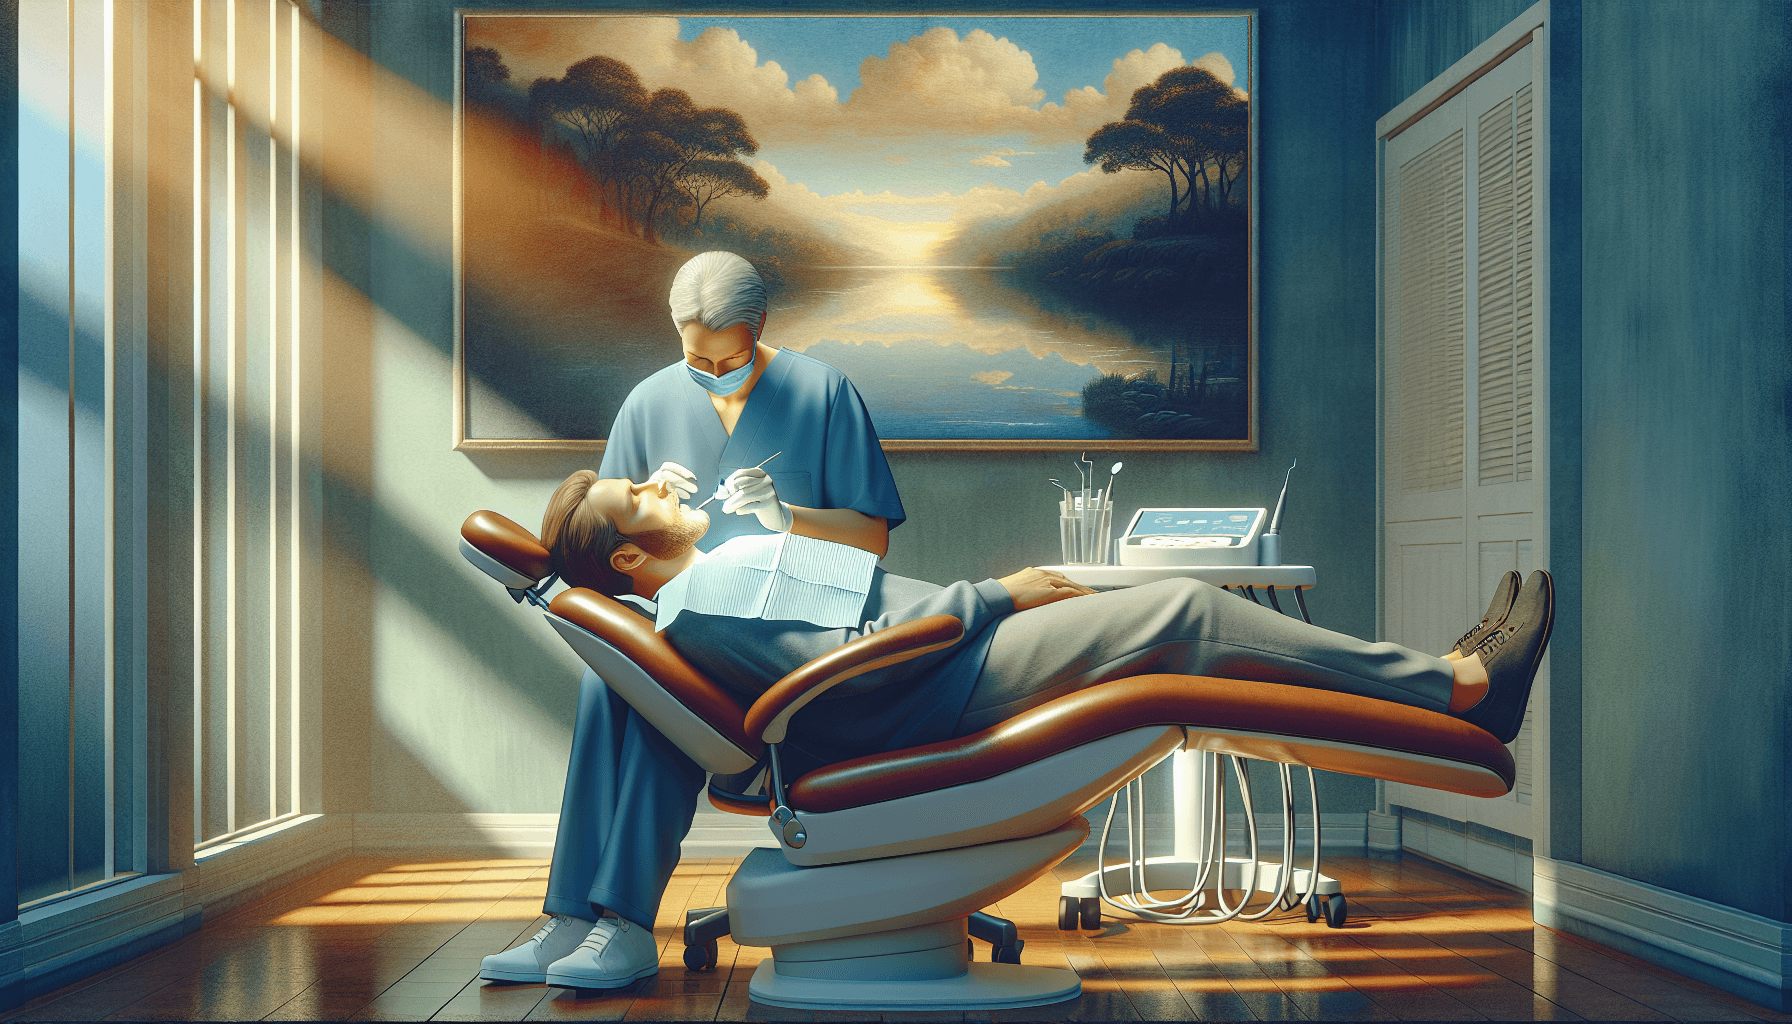 Illustration of a calm and relaxed patient undergoing oral sedation during a dental procedure